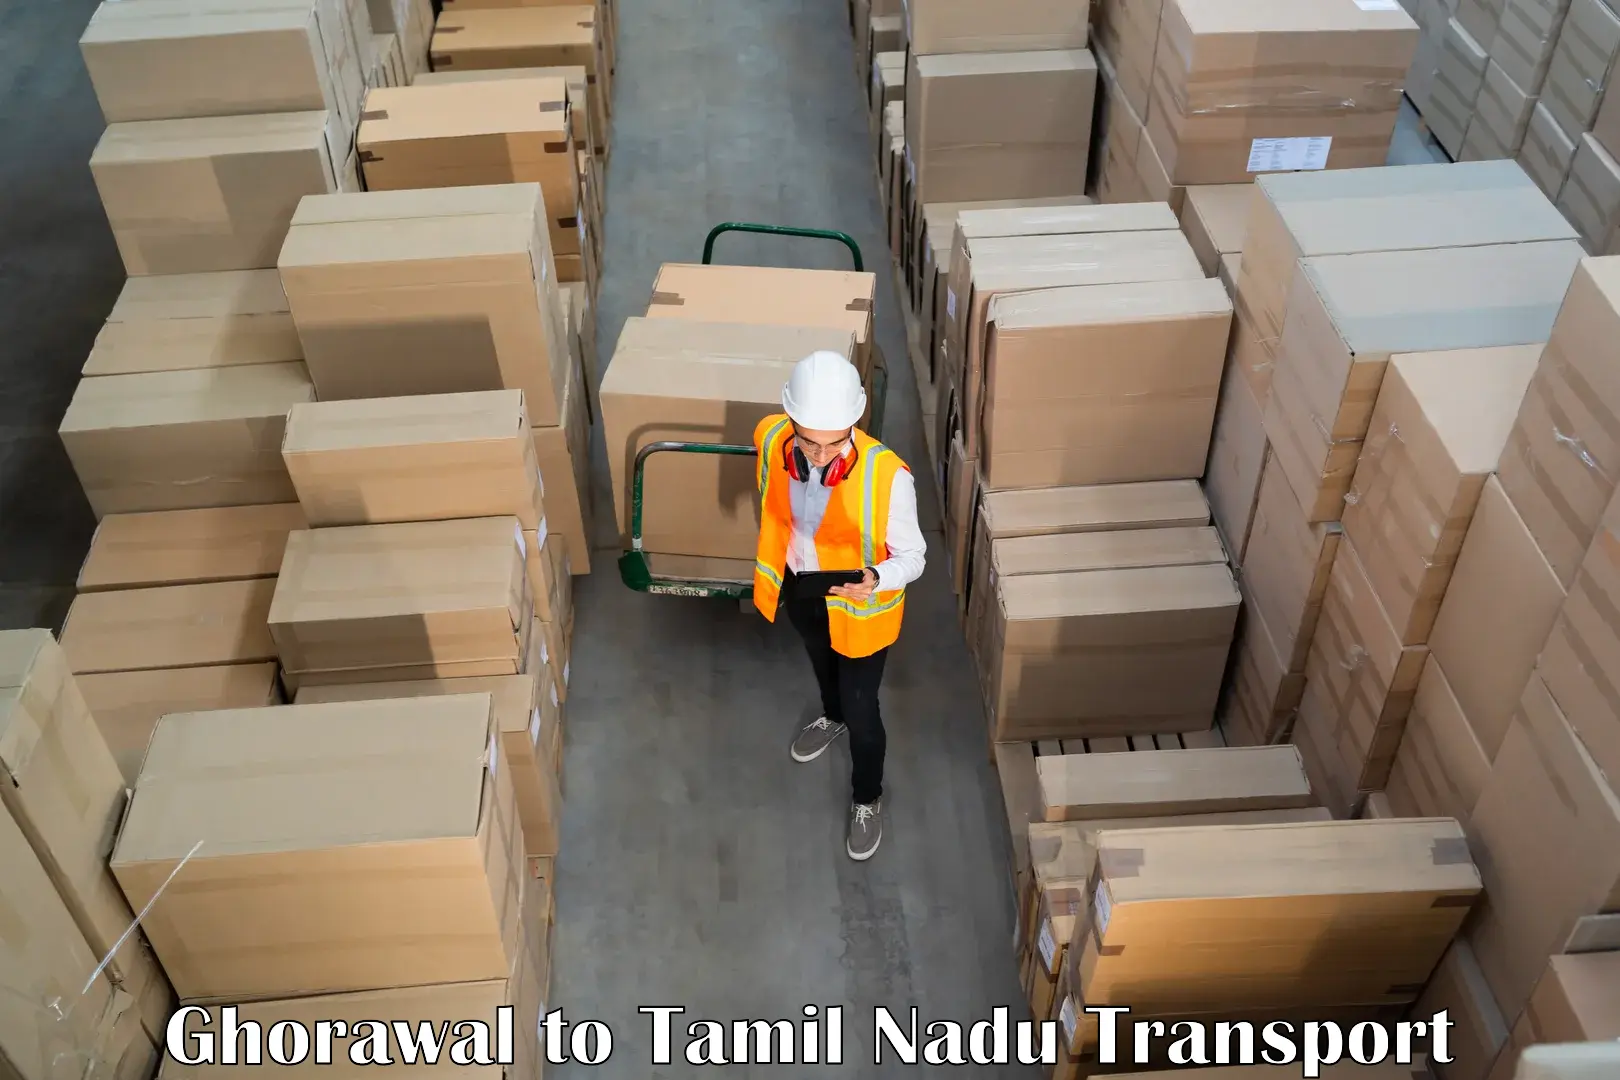 Delivery service Ghorawal to Palladam